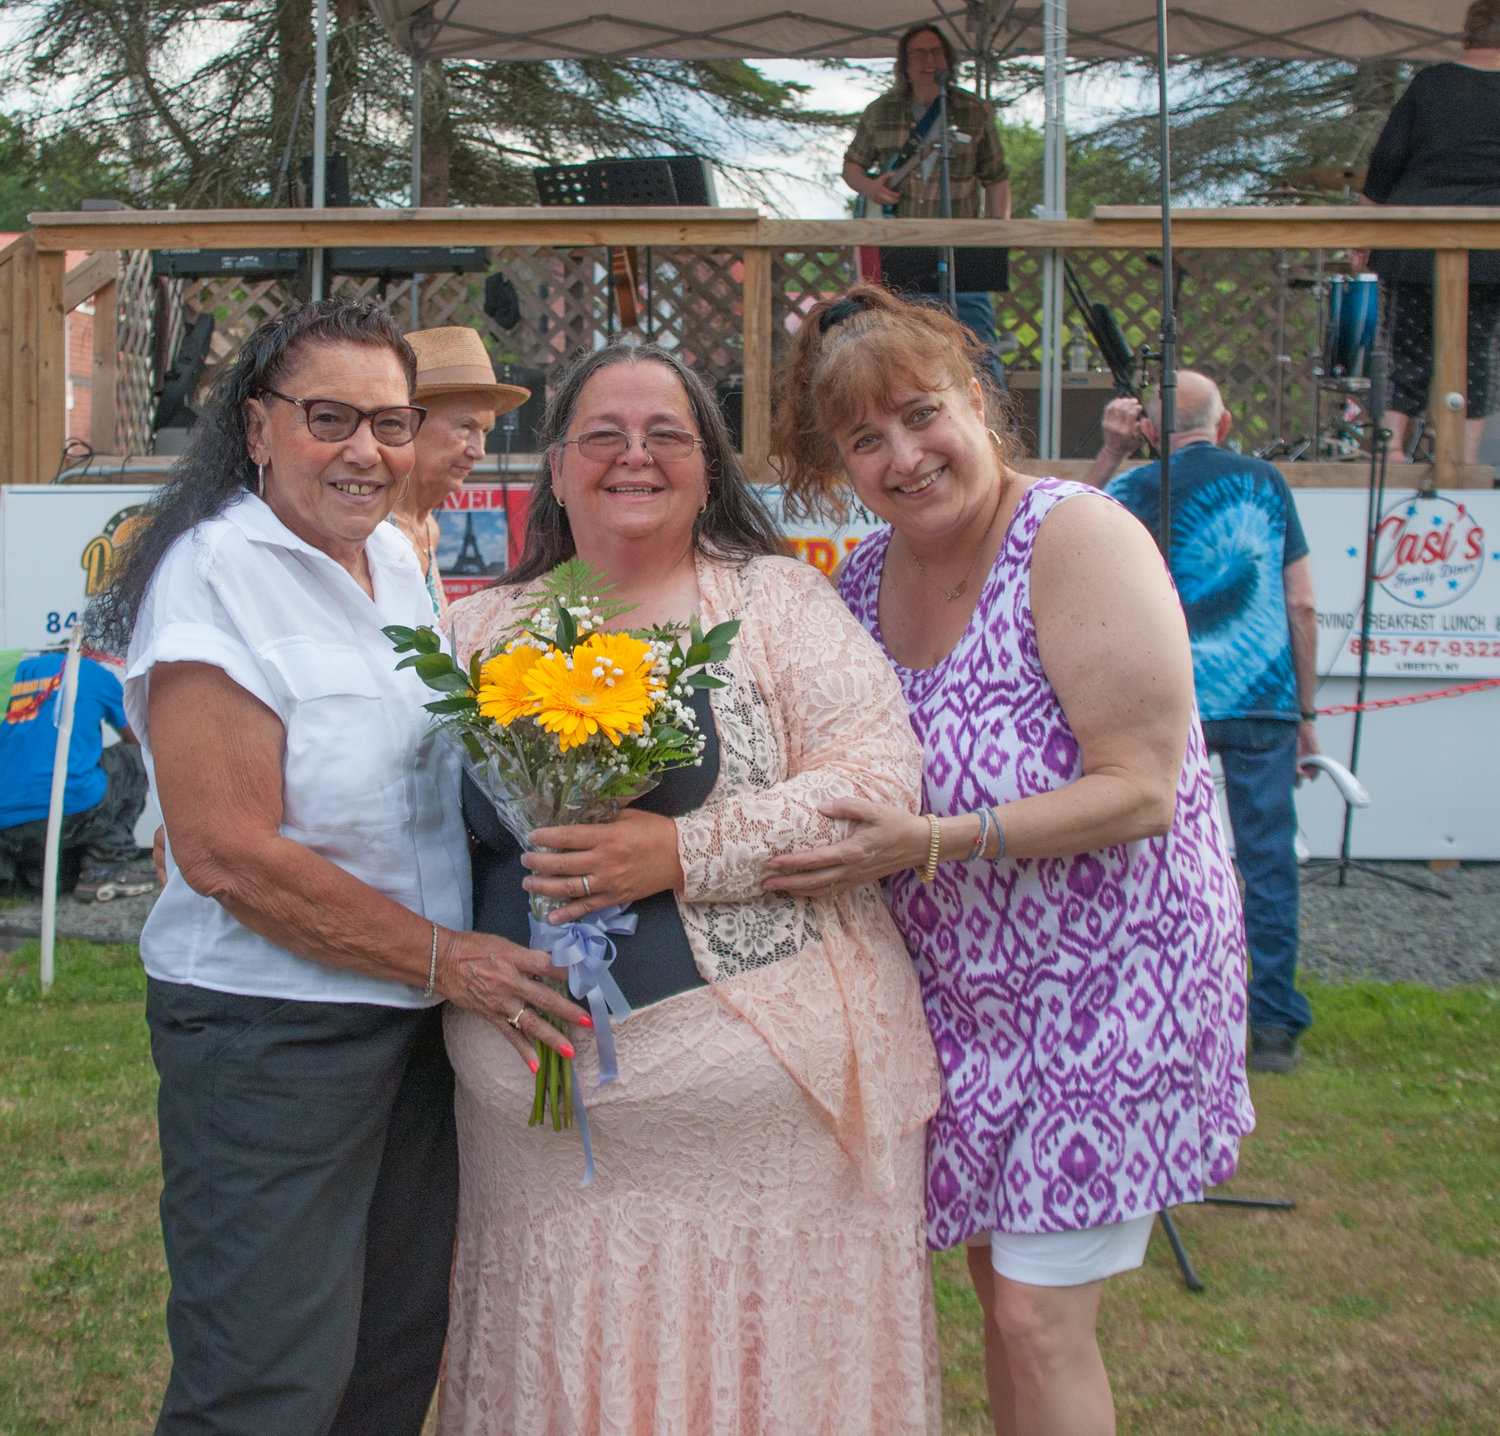 Newlywed Laura Garone, center, surprised family and friends during an outdoor concert by tying the knot with Gregory Scott Cherry. Only her bridesmaids, the groom and Dharma the Wonder Dog were in on the secret. Oh, right... I was there, too. Congratulations!